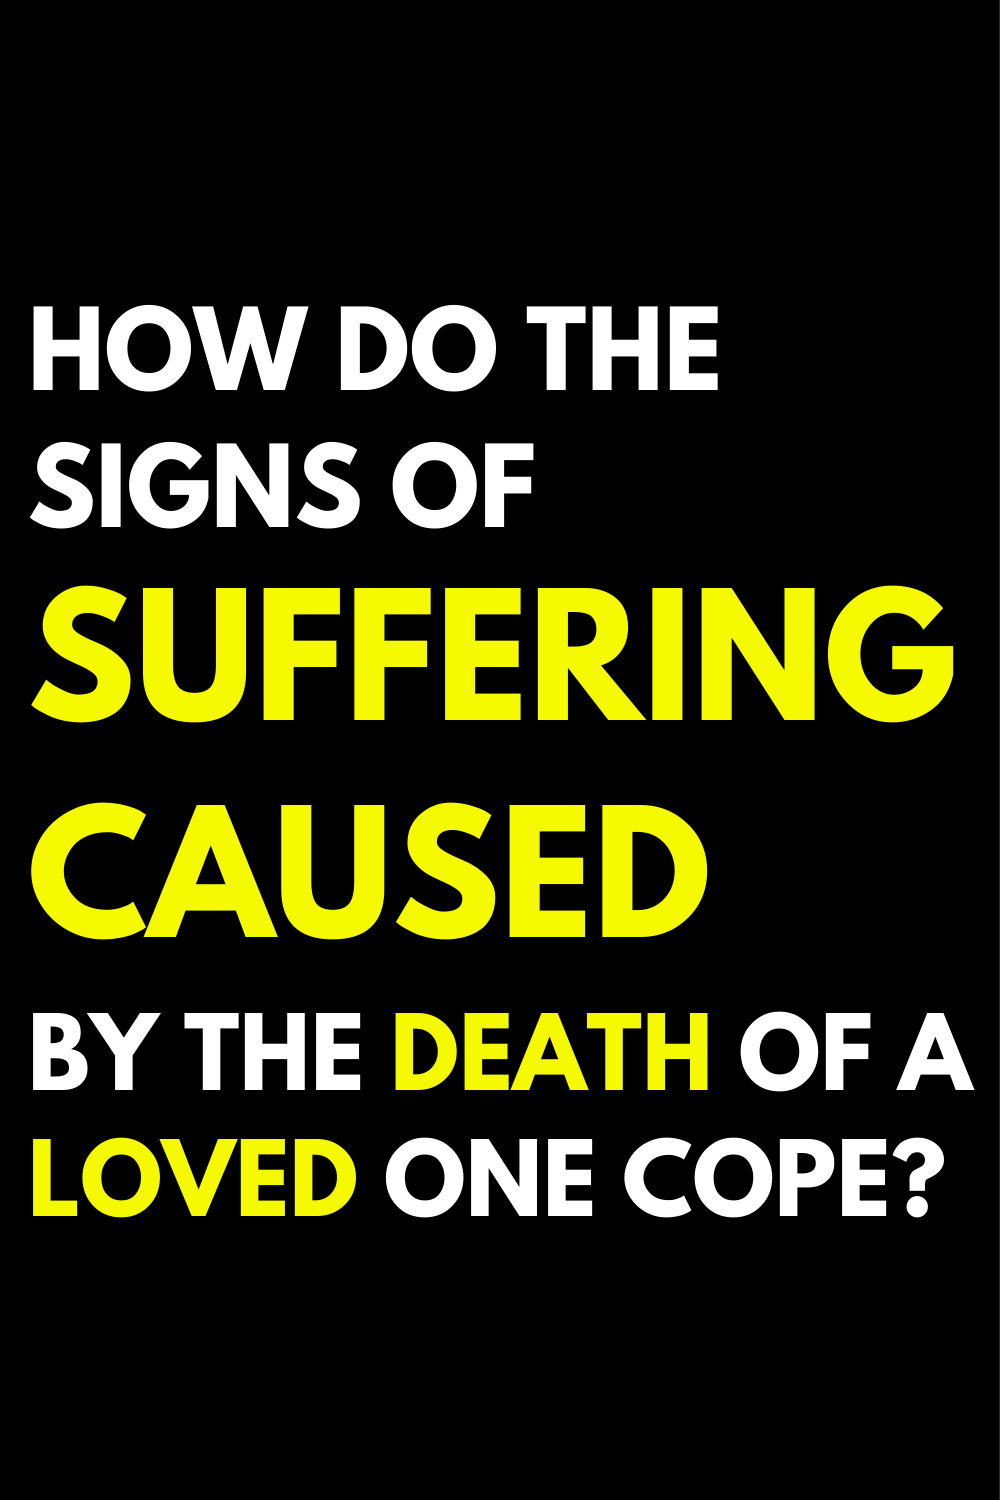 How do the signs of suffering caused by the death of a loved one cope?